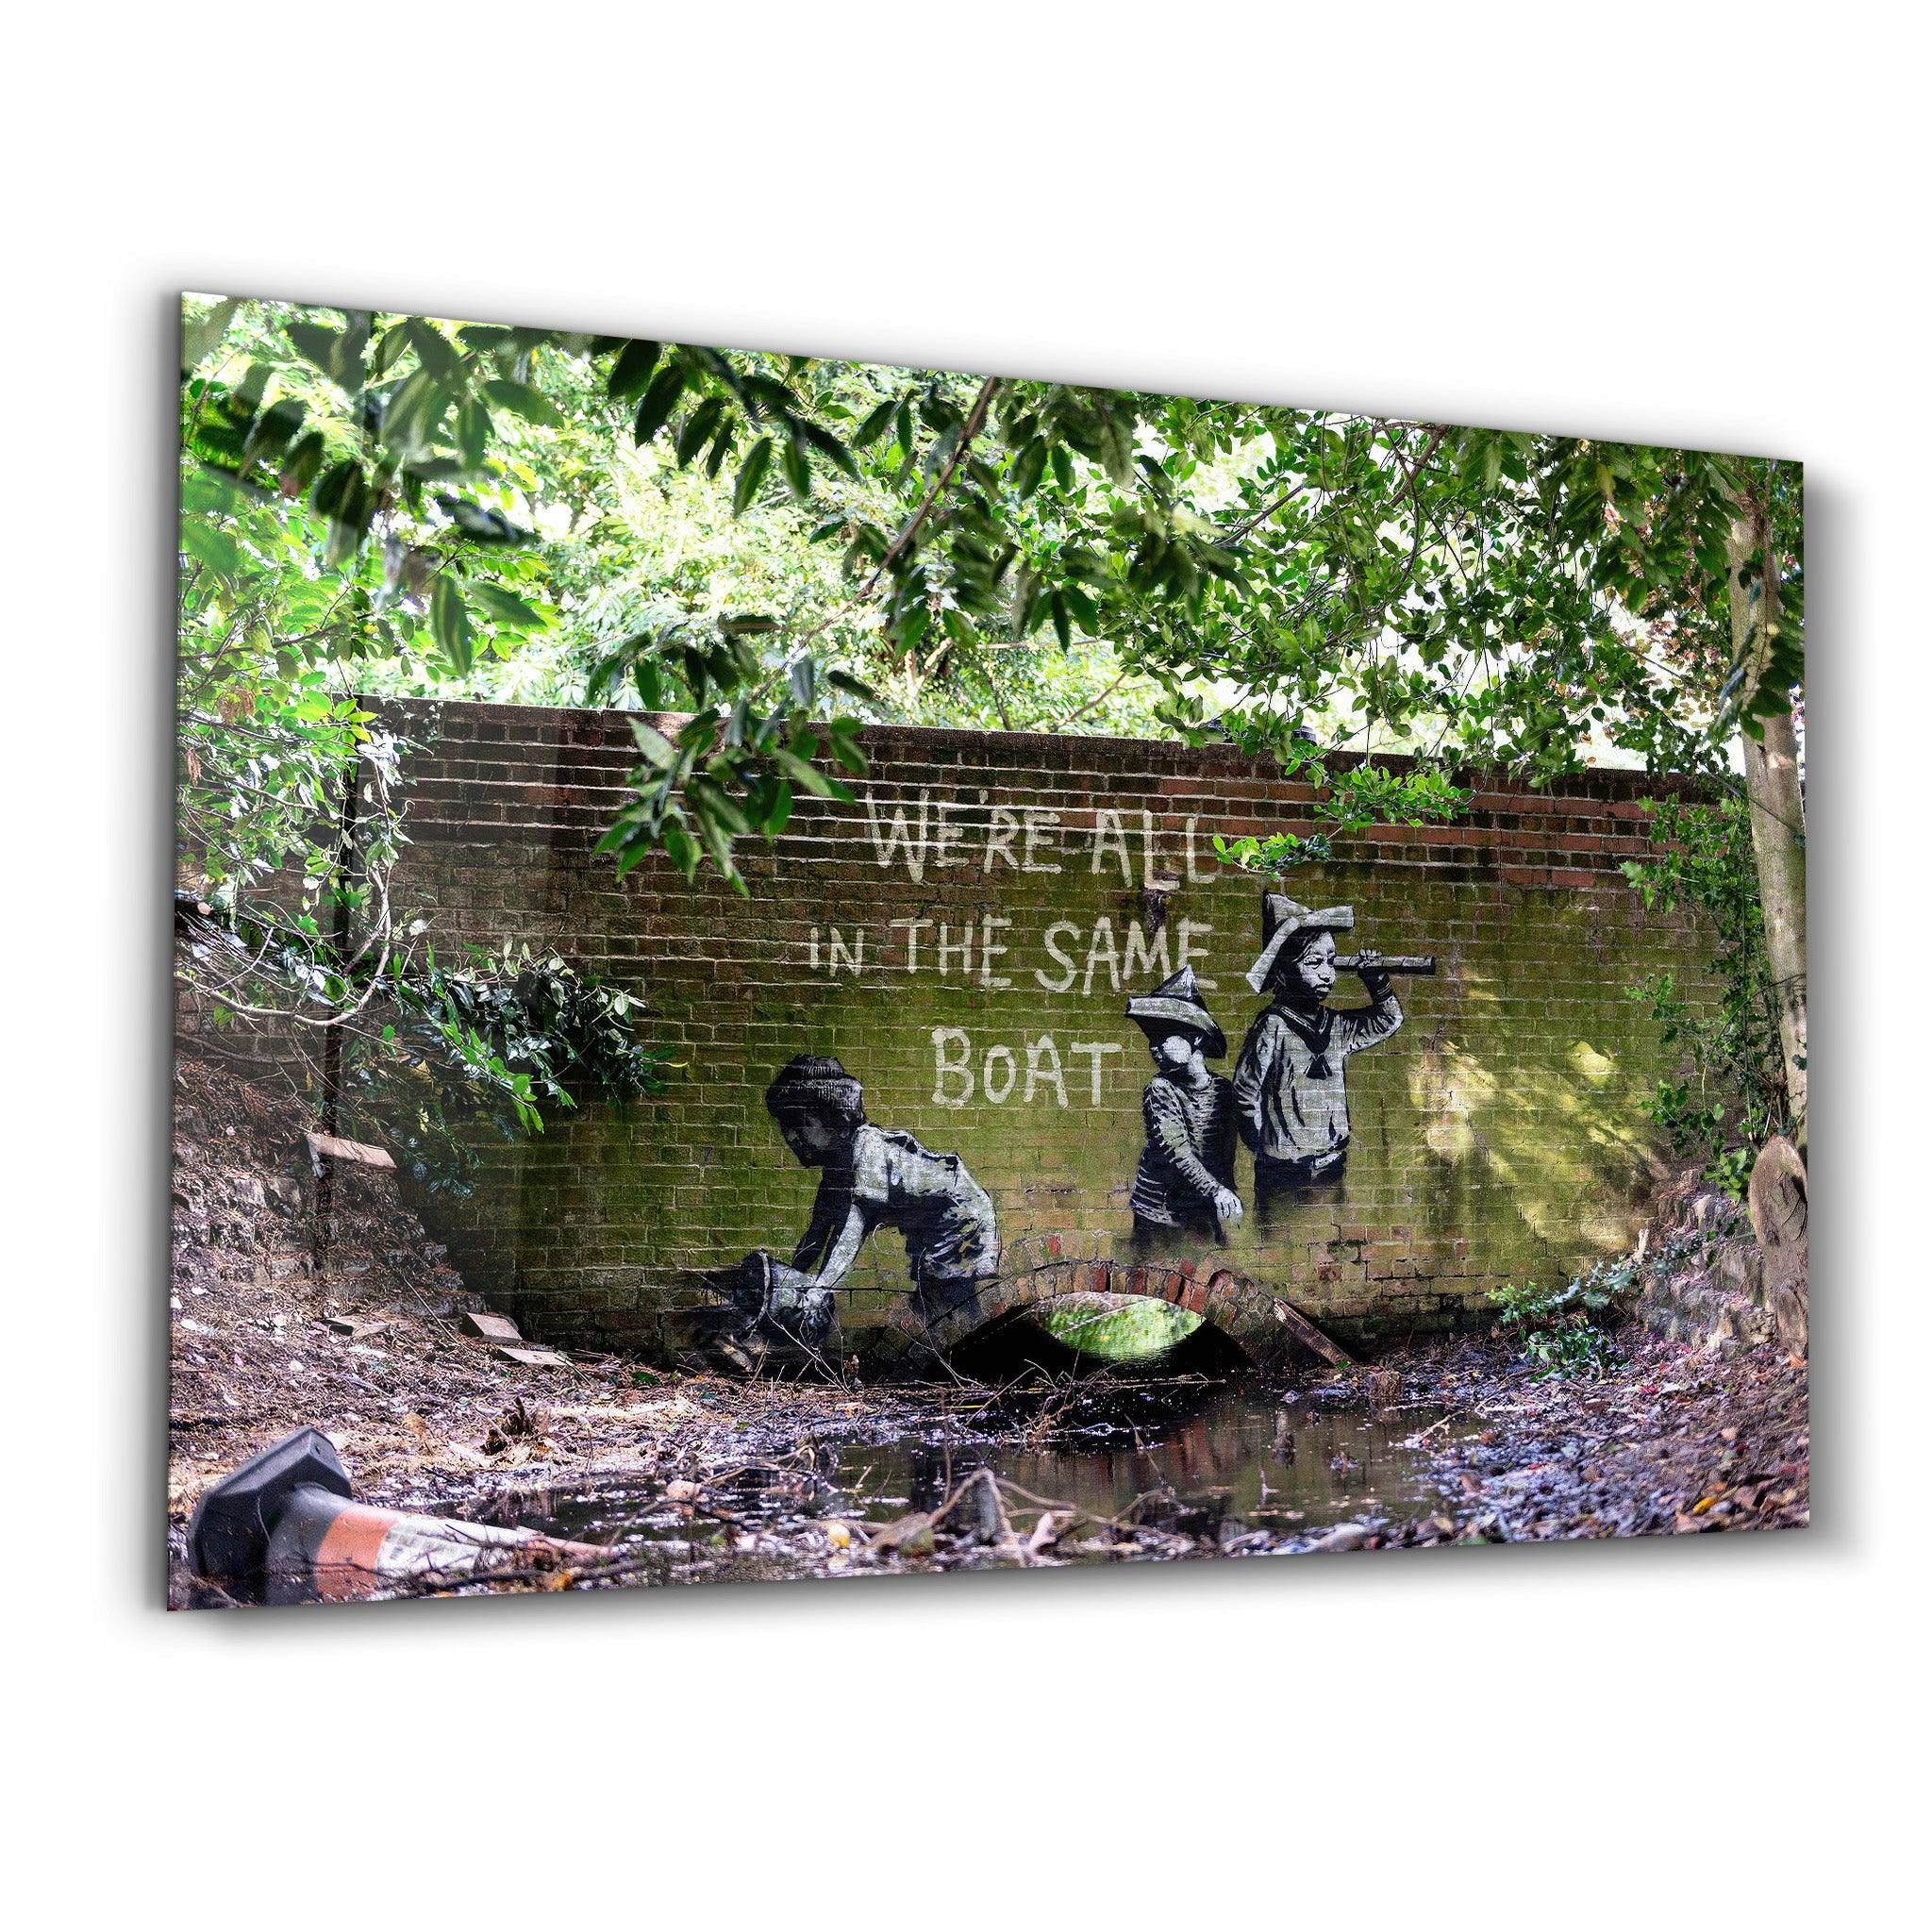 ・"Banksy - We are all in the same boat"・Glass Wall Art - ArtDesigna Glass Printing Wall Art